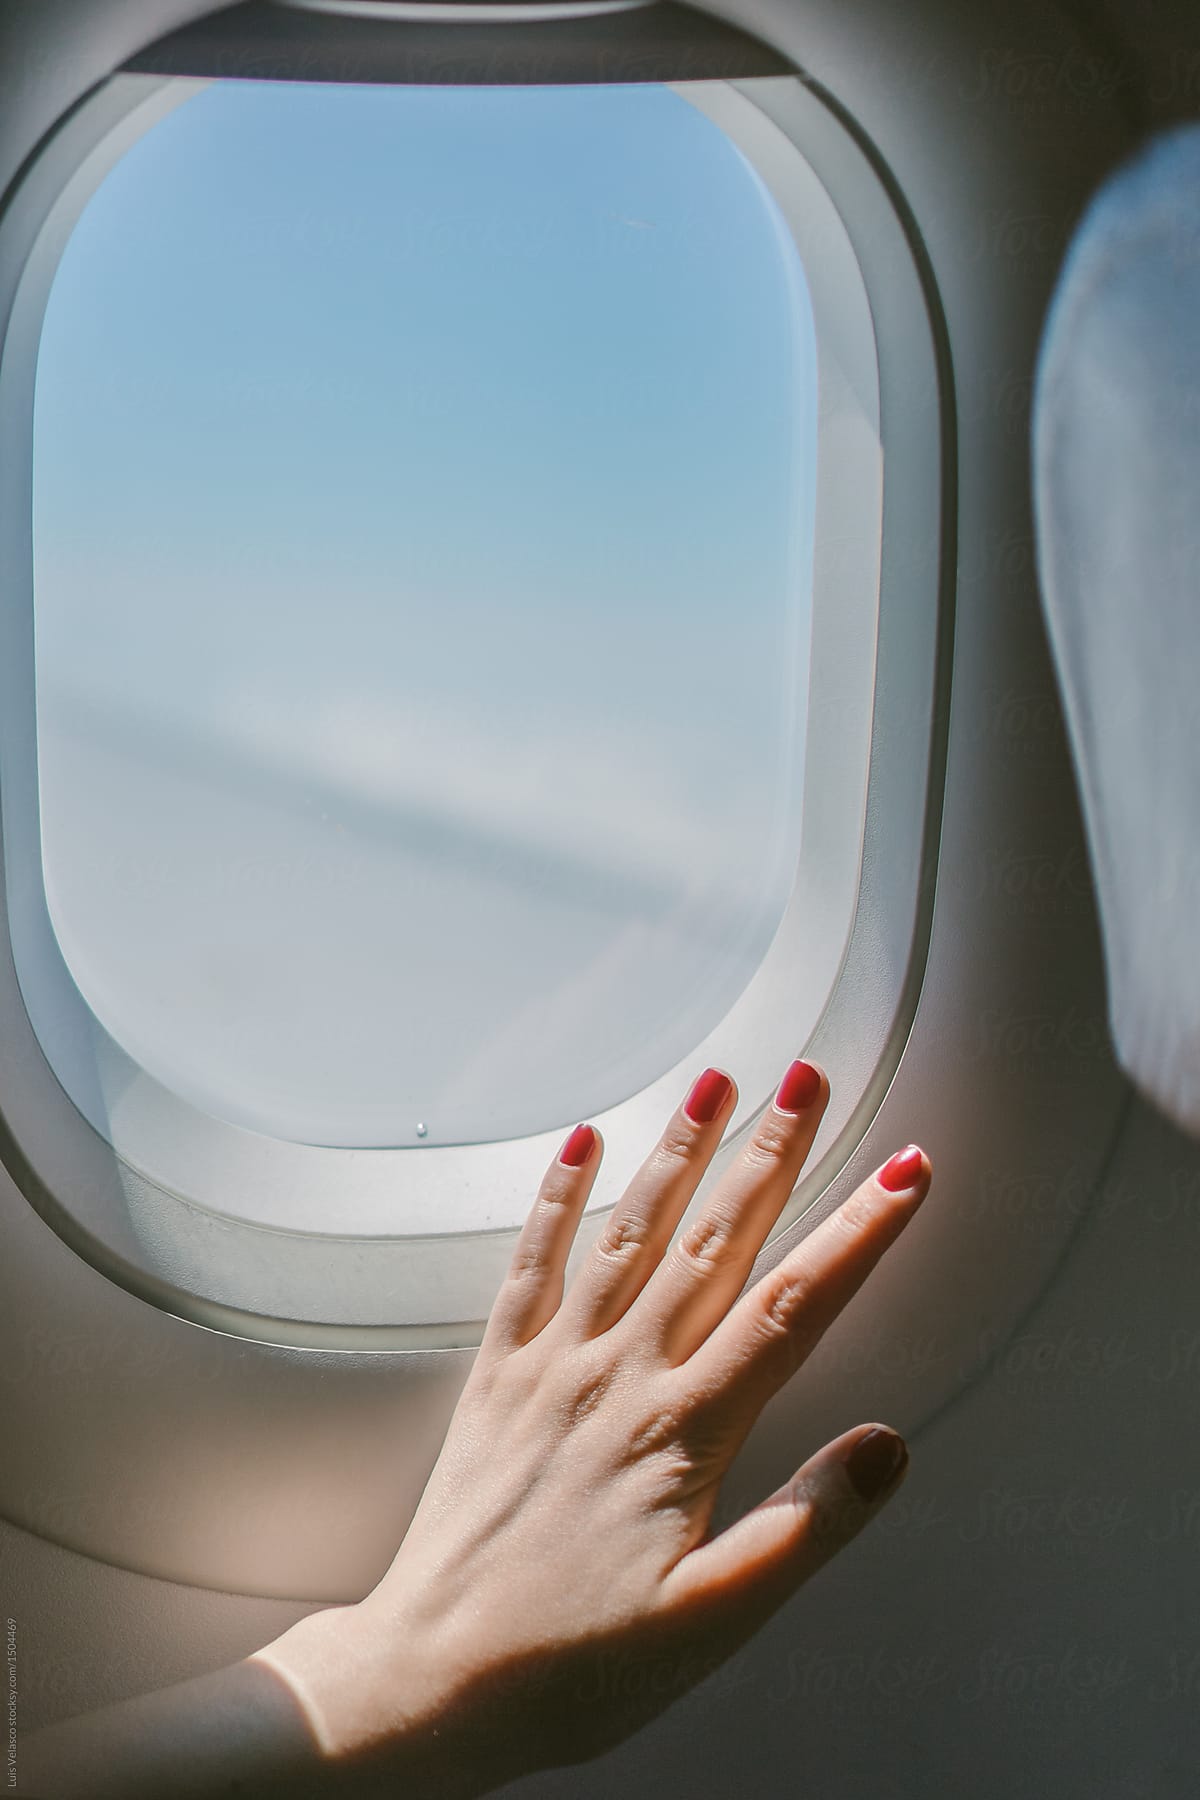 Airplane Window With Female Hand With Red Nail Polish.